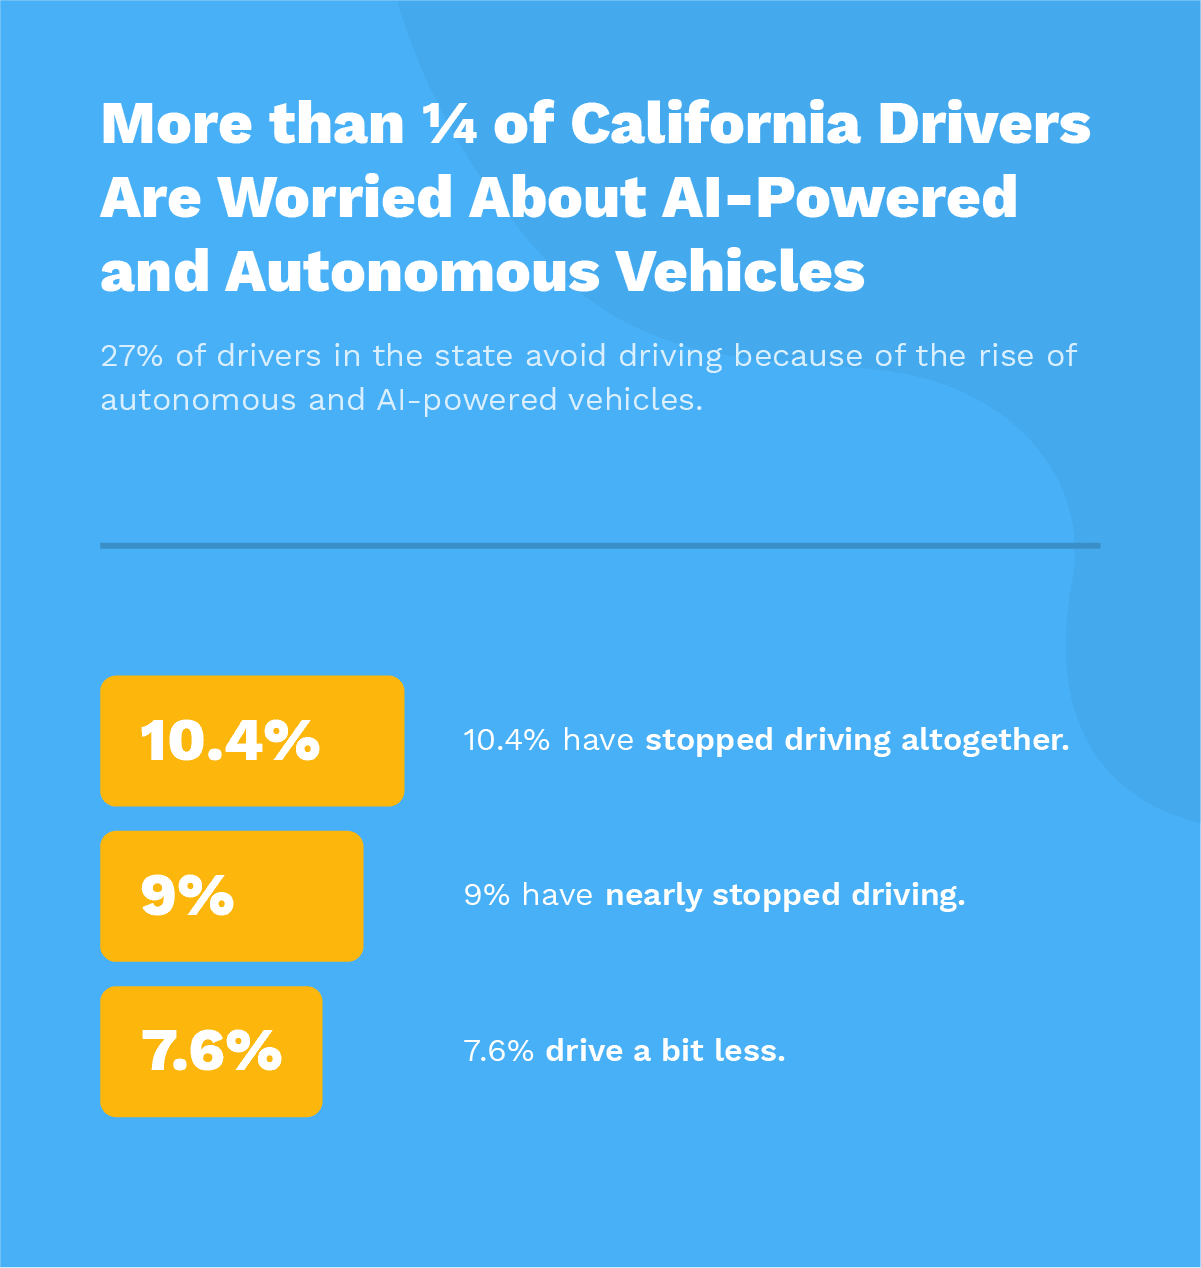 More than a Quarter of California Drivers Are Worried About AI-Powered and Autonomous Vehicles